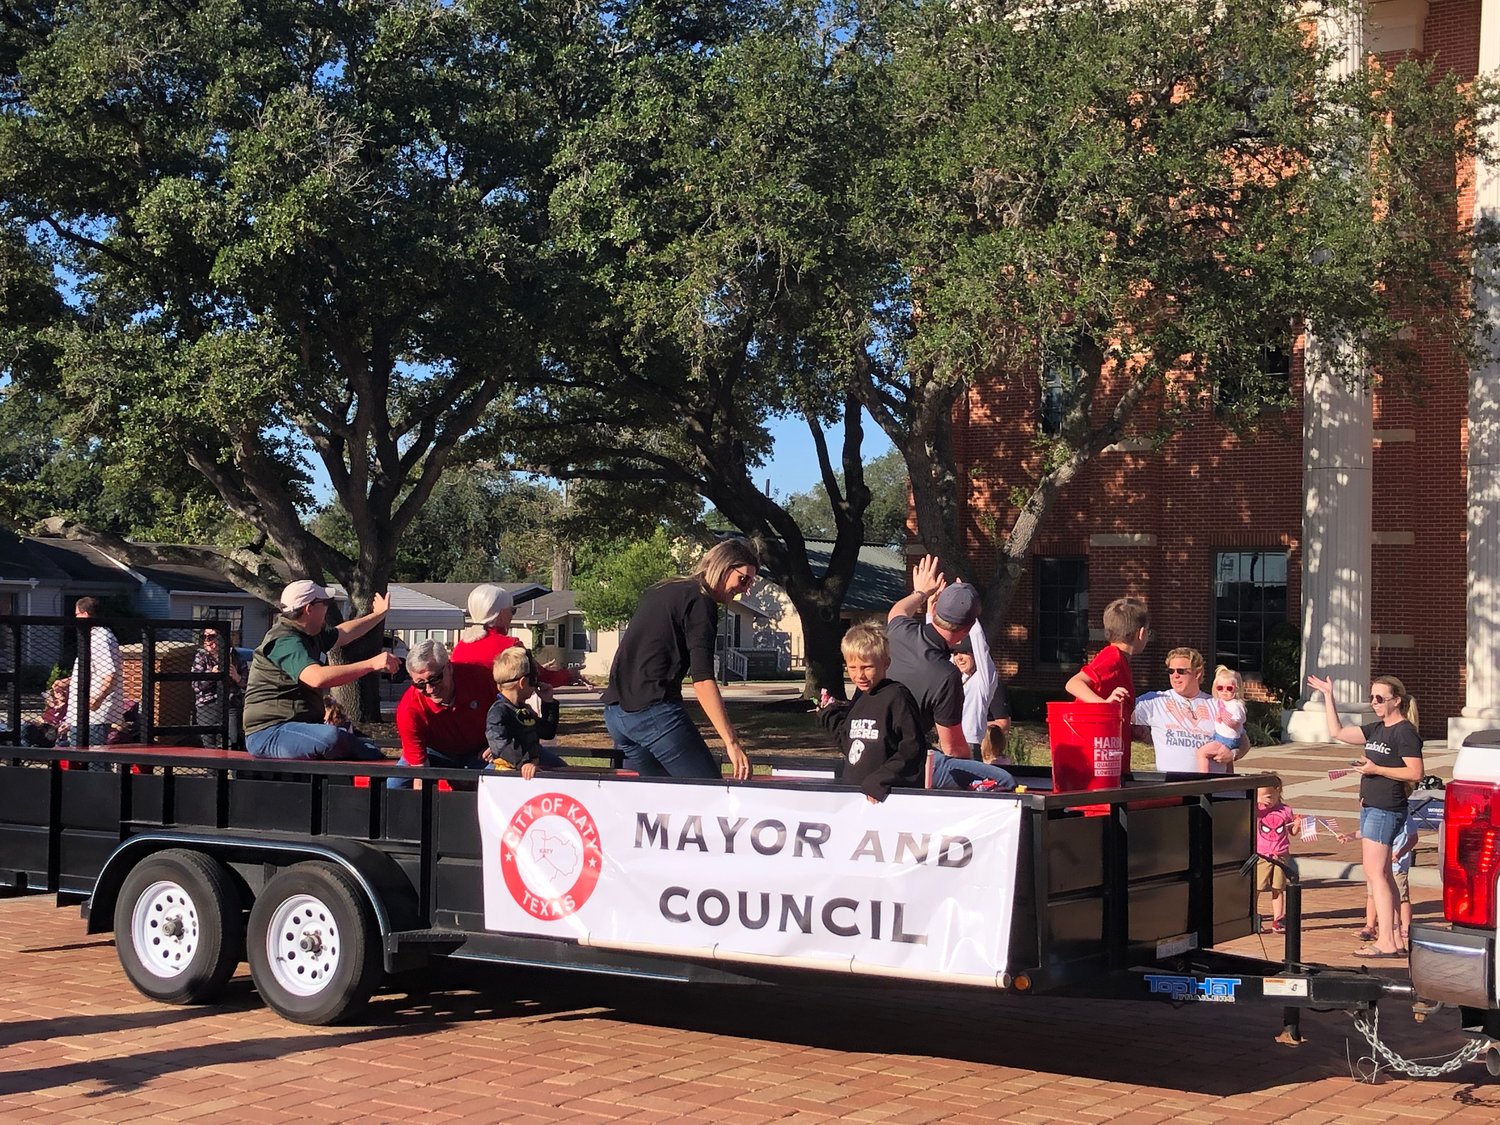 Mayor Dusty Thiele, in red shirt at left, is getting some candy to toss to the crowd, while other Katy City Council members toss candy to onlookers.